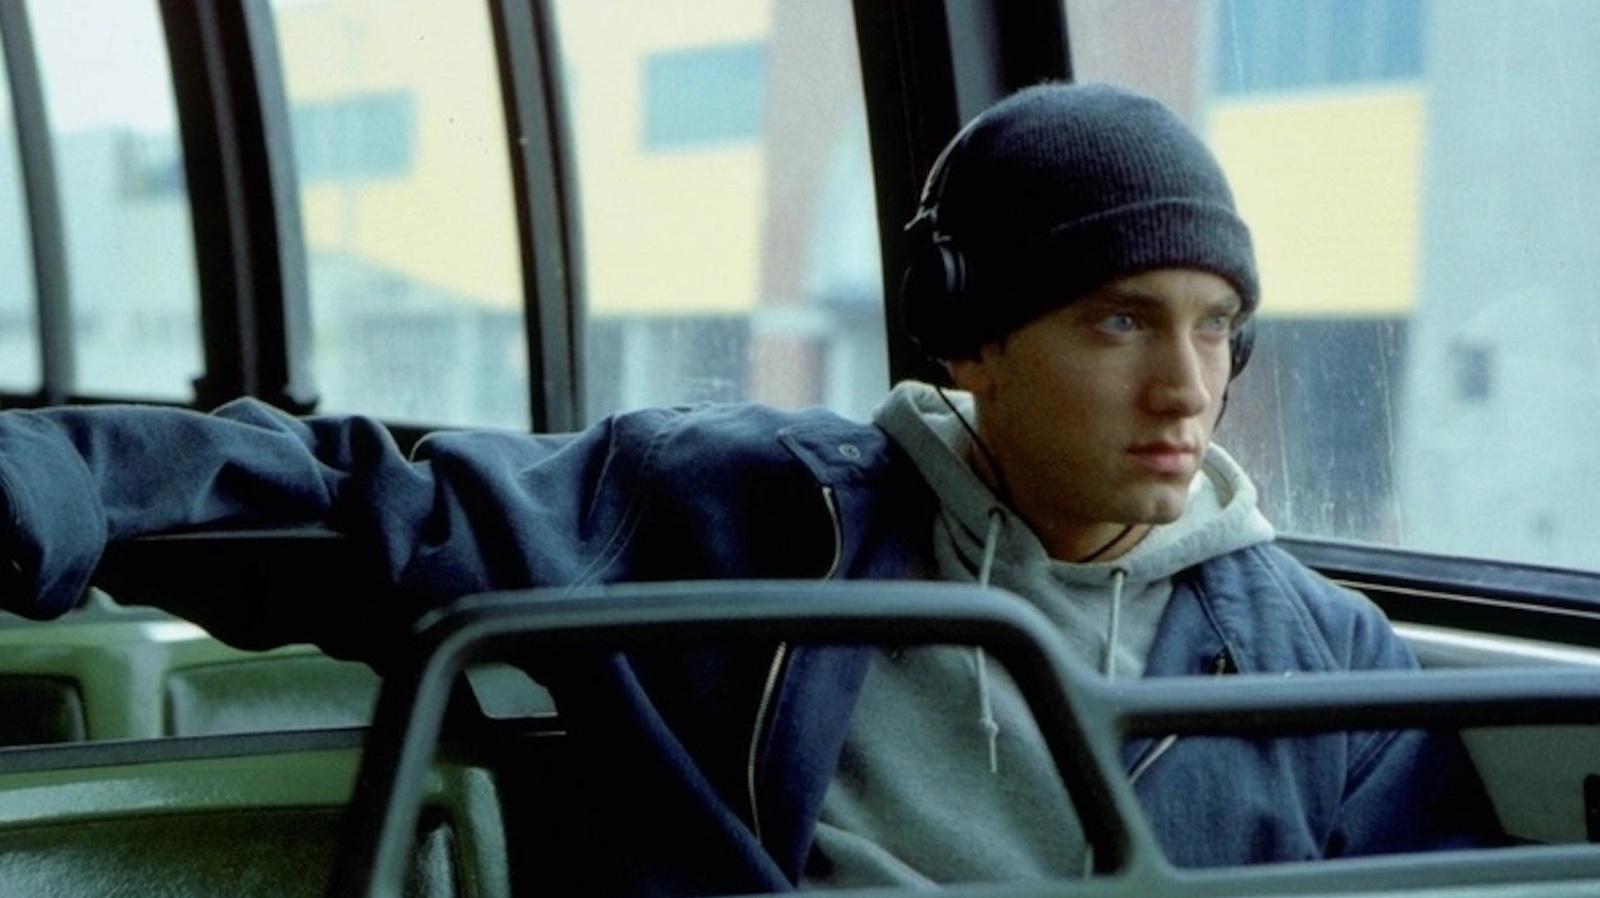 A man in a skull cap sits on a bus with headphones on looking out the window